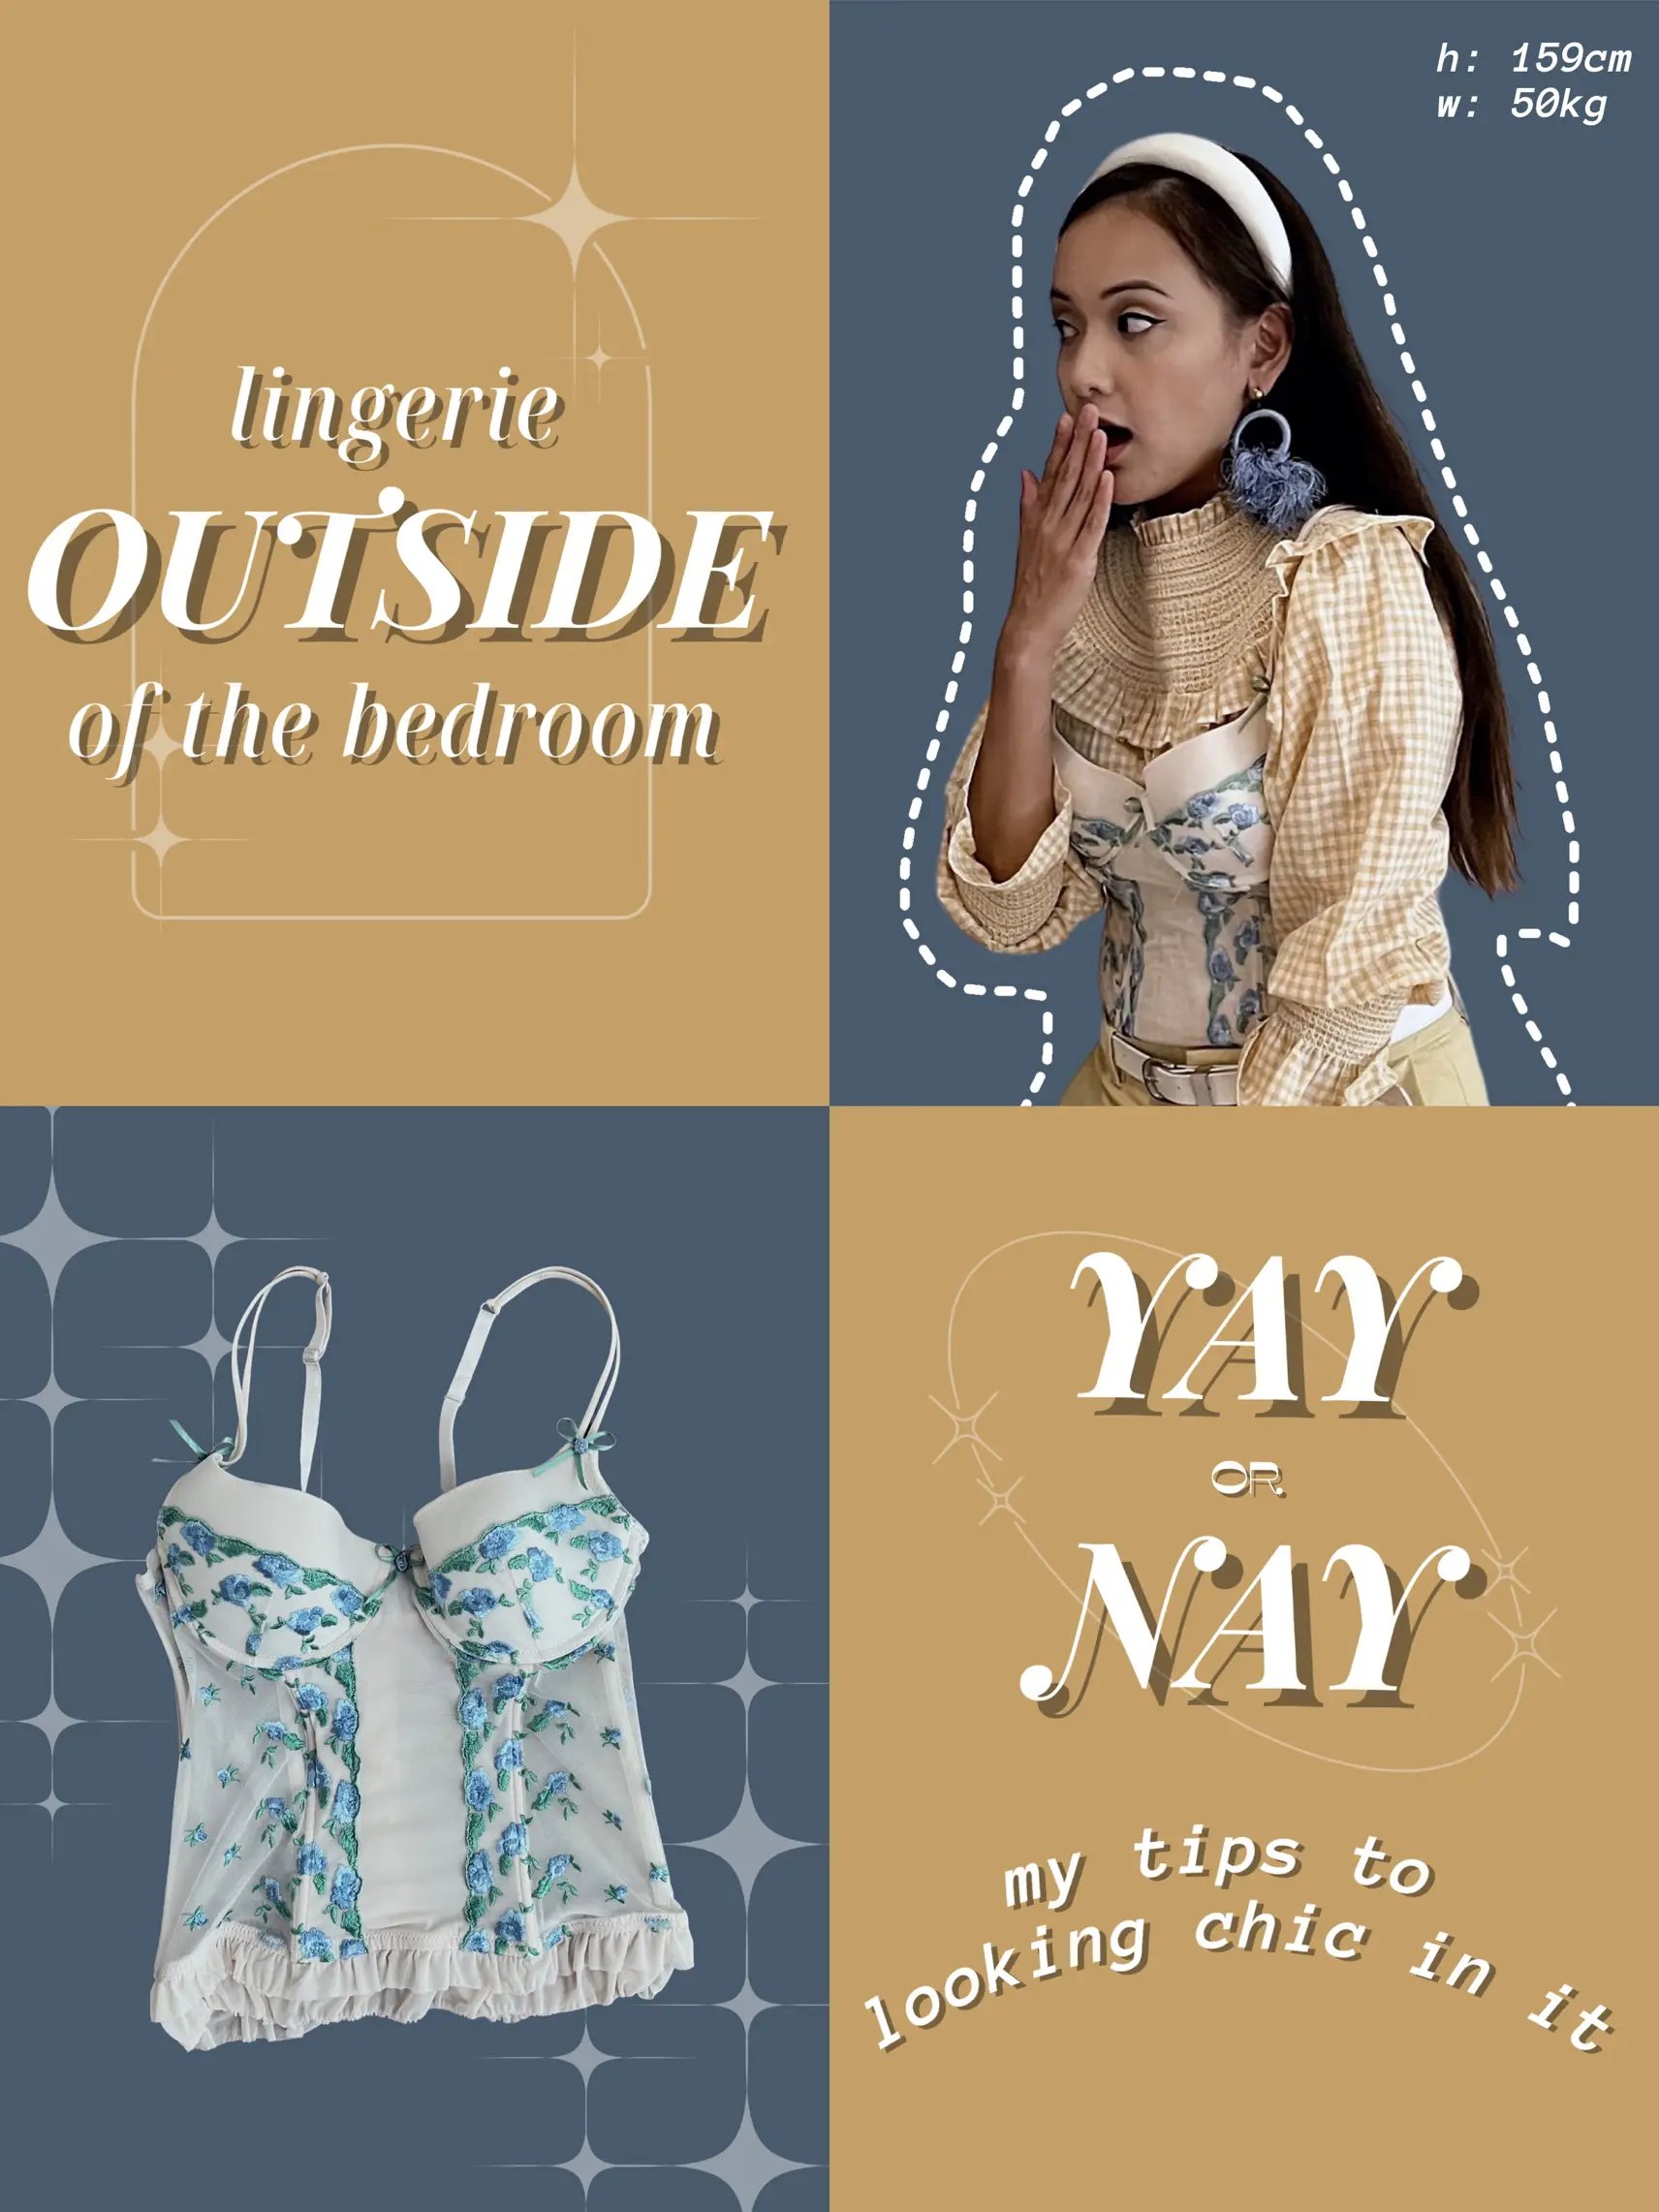 How to Wear Lingerie Outside